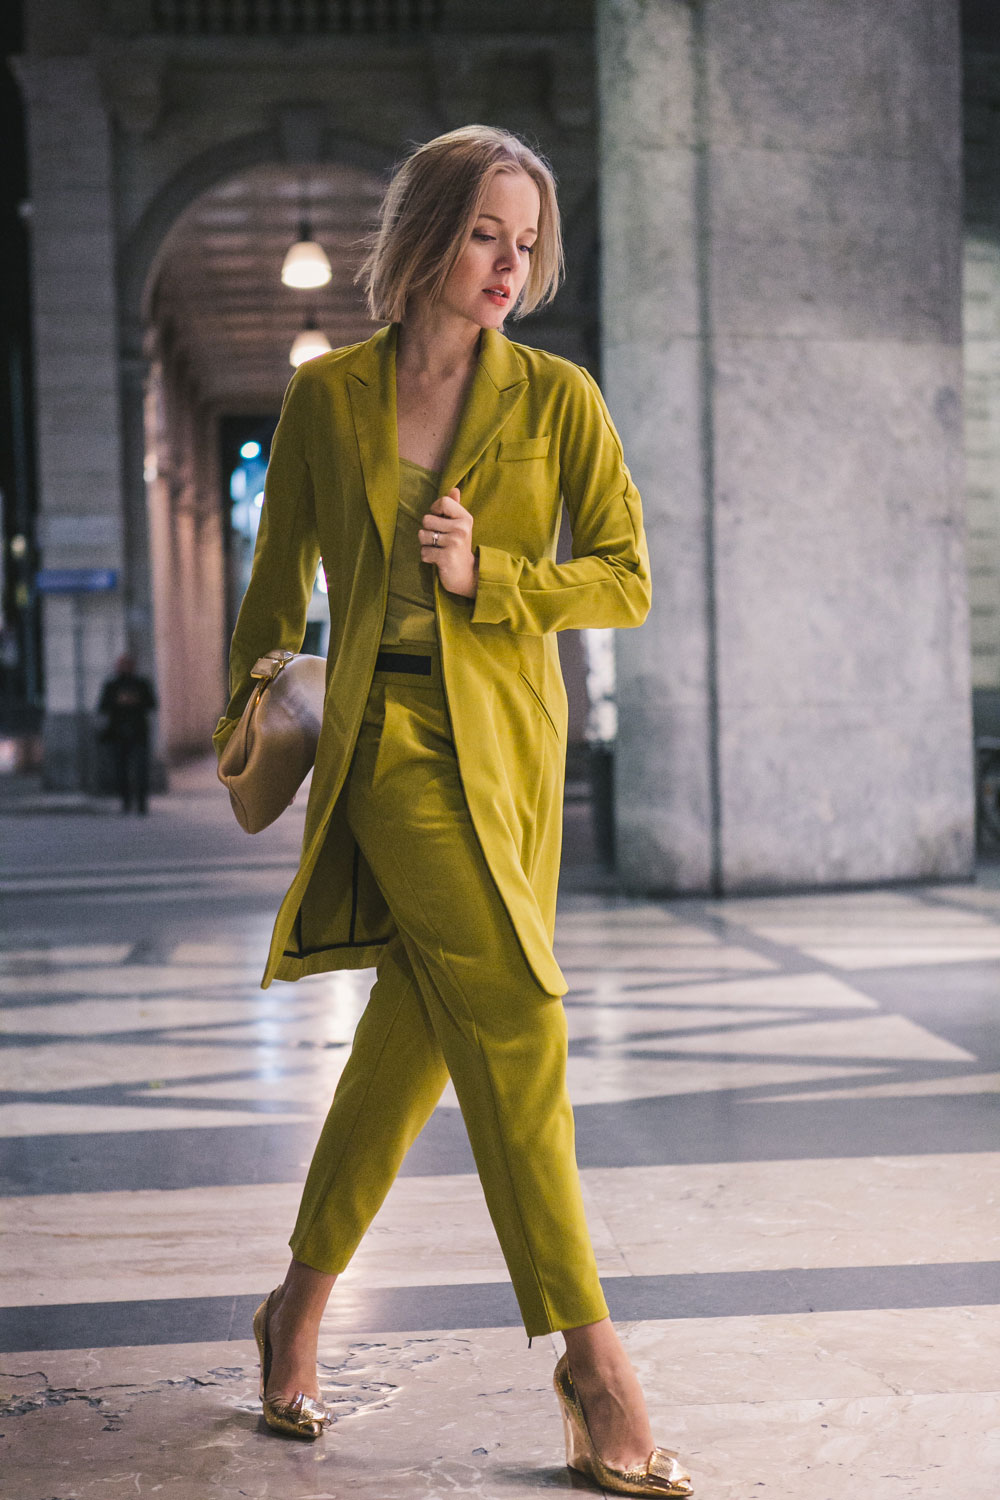 darya-kamalova-fashion-lifestyle-blogger-from-thecablook-on-san-pietro-all-orto-opening-party-in-milan-wears-asos-suit-marni-clutch-burberry-prosum-wedges-6925